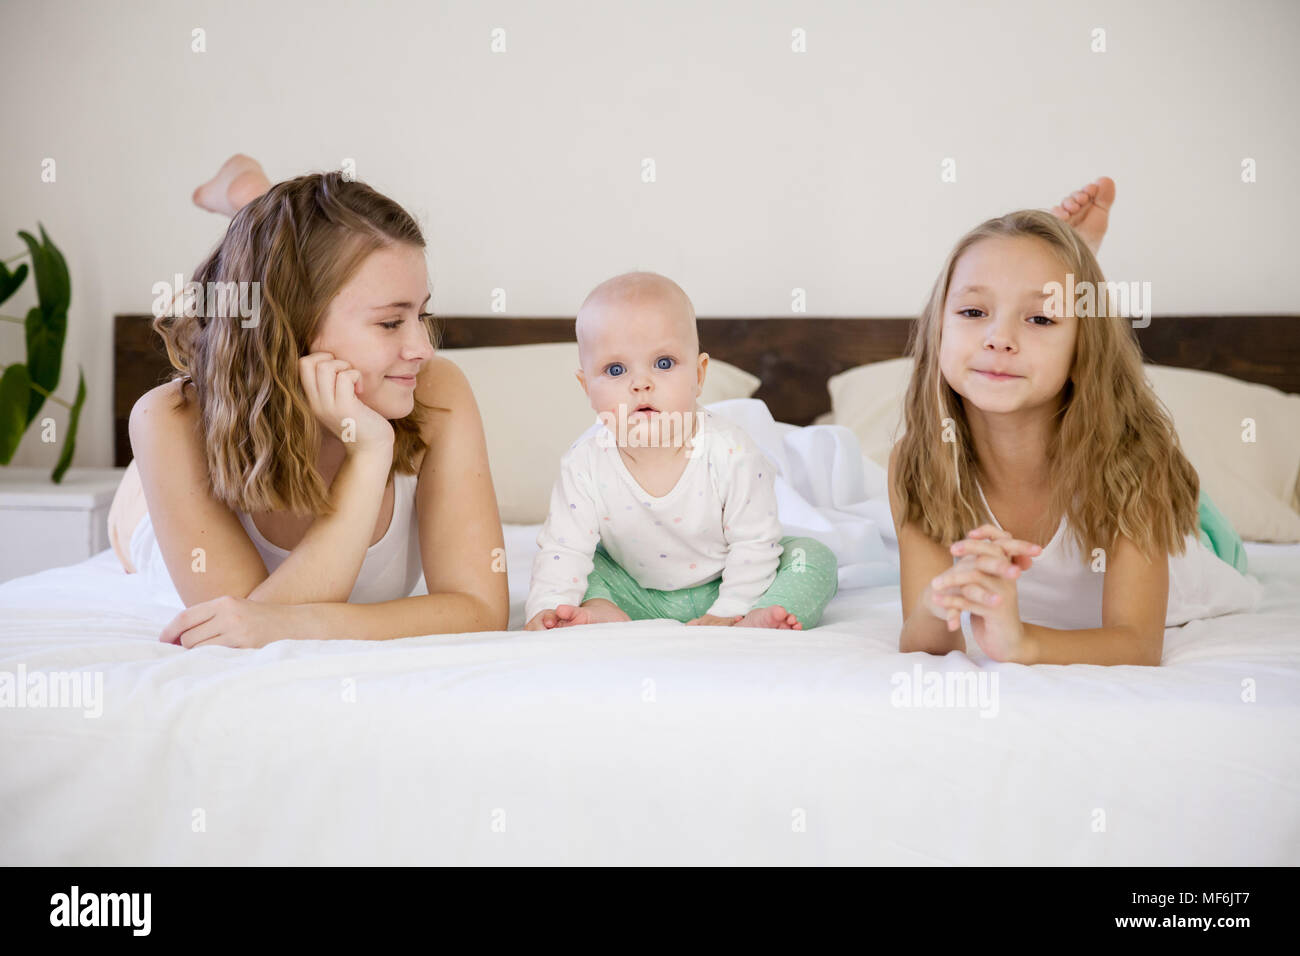 three girls play sisters in the morning in the bedroom on the bed Stock Photo